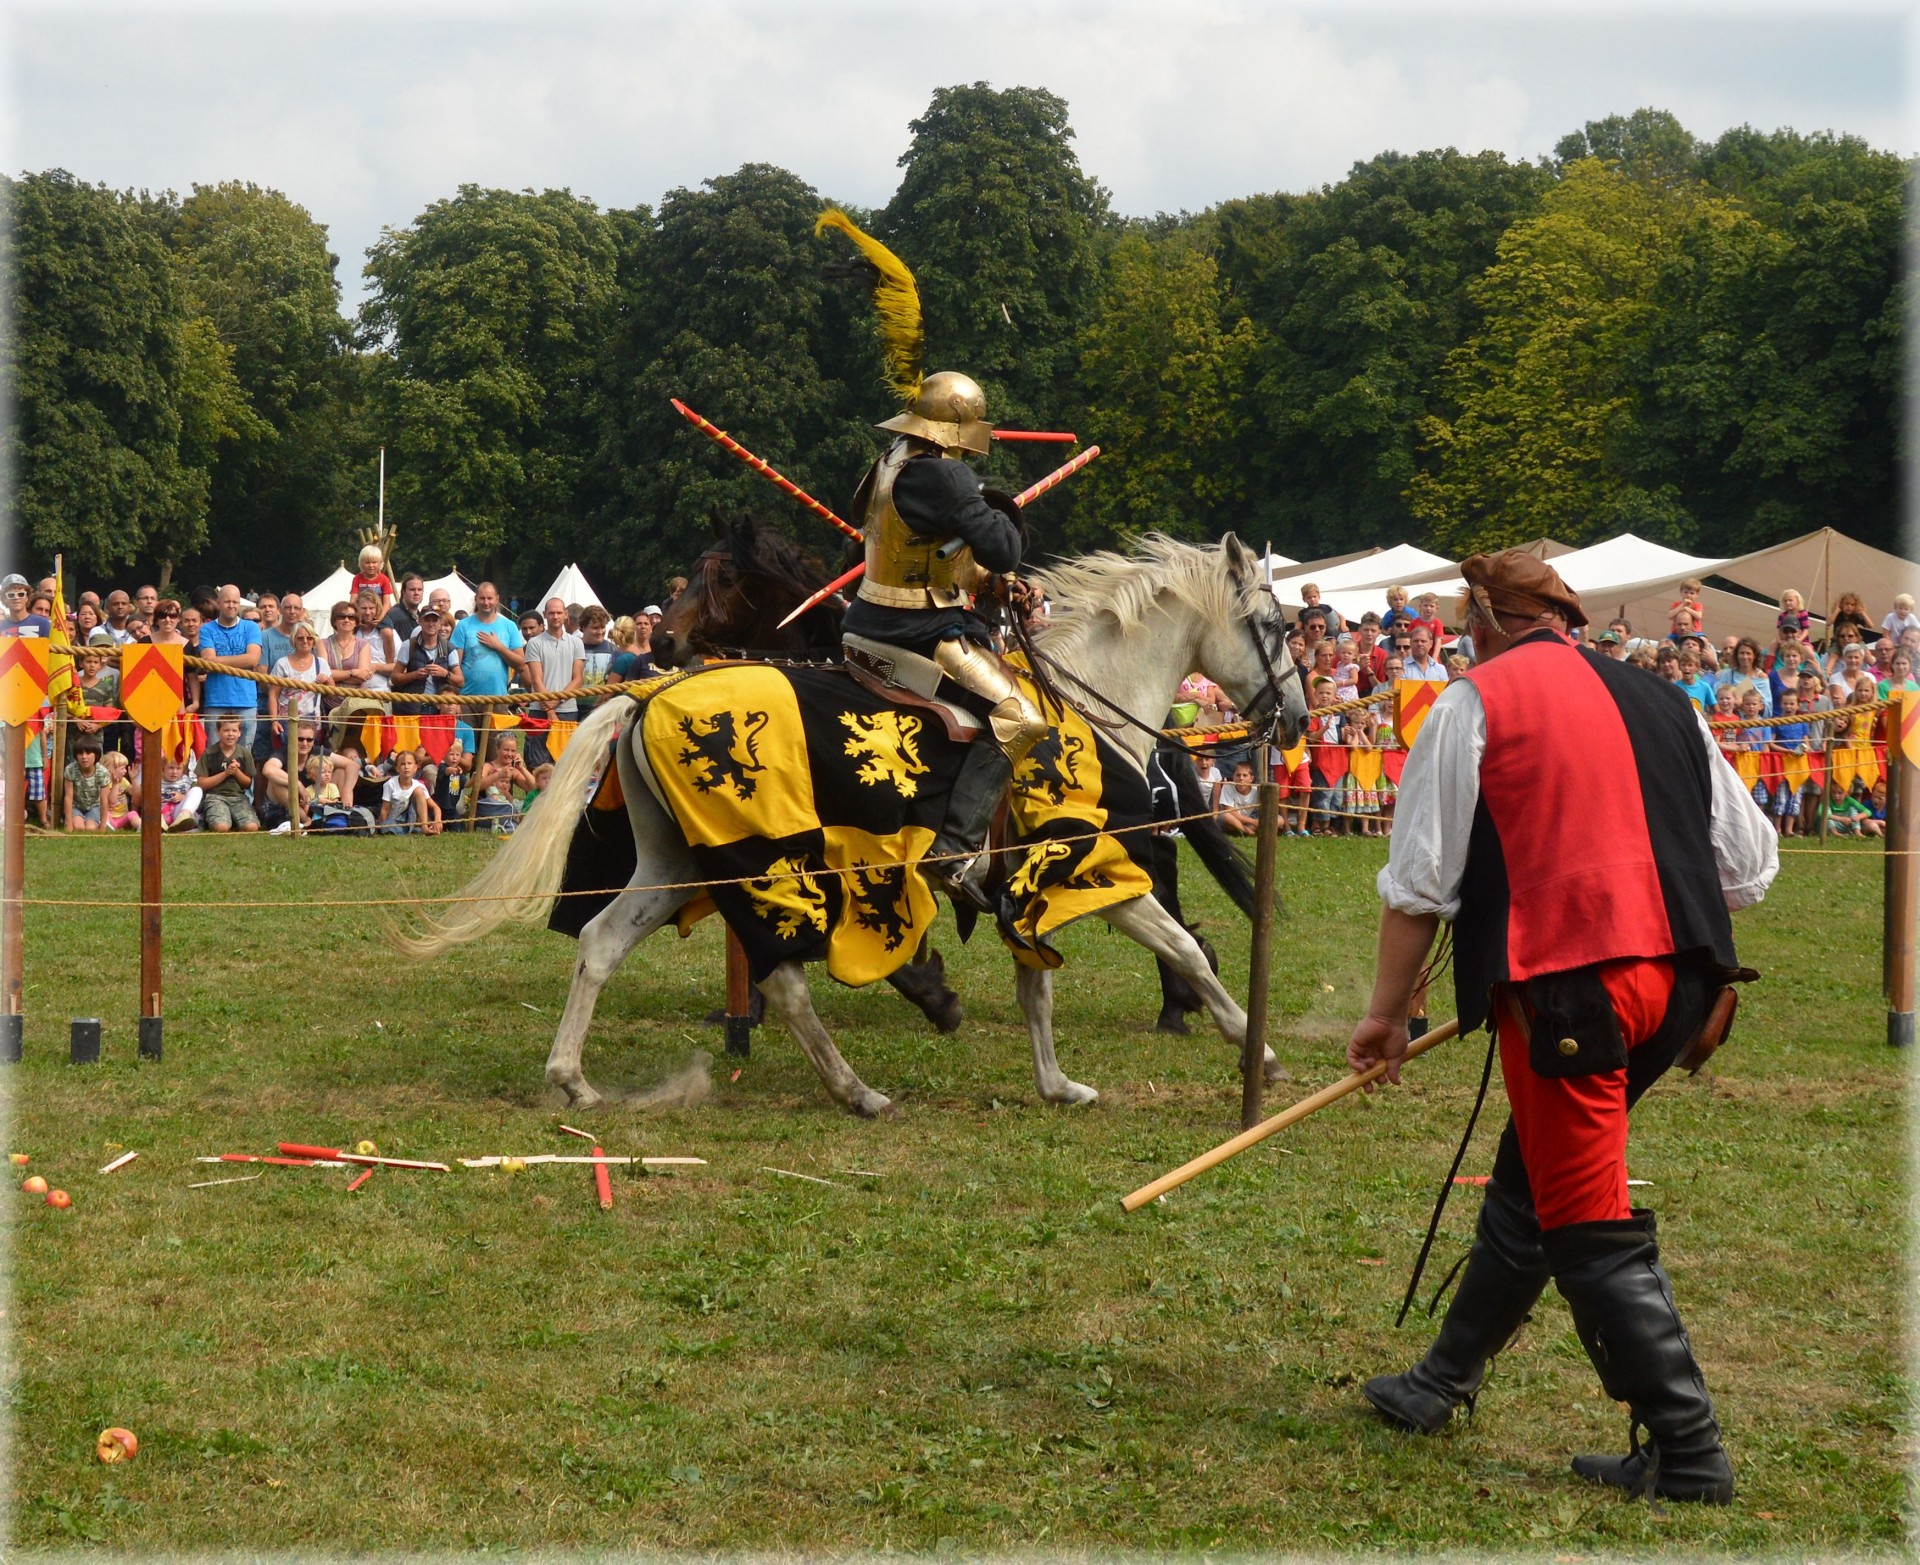 The jousting tournament, Series 2